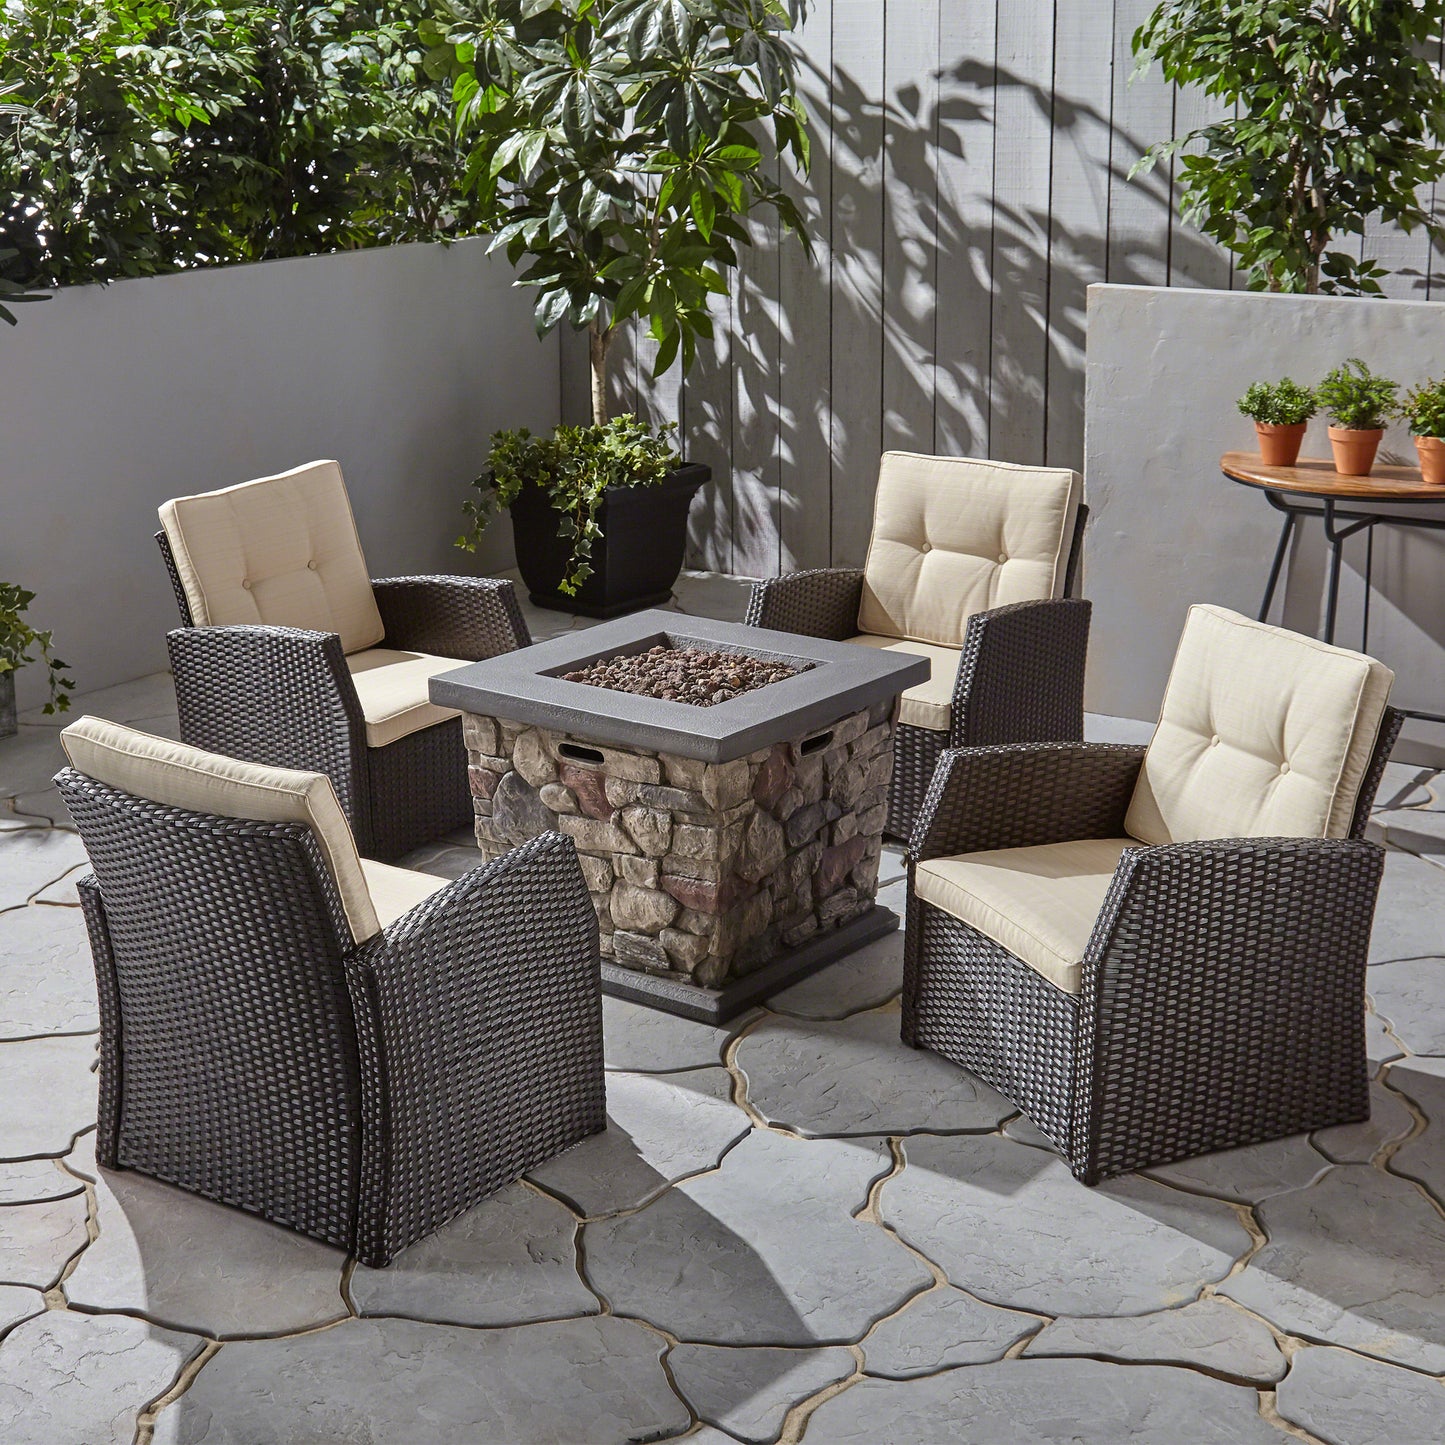 Audrielle Outdoor 4 Seater Wicker Chat Set with Fire Pit